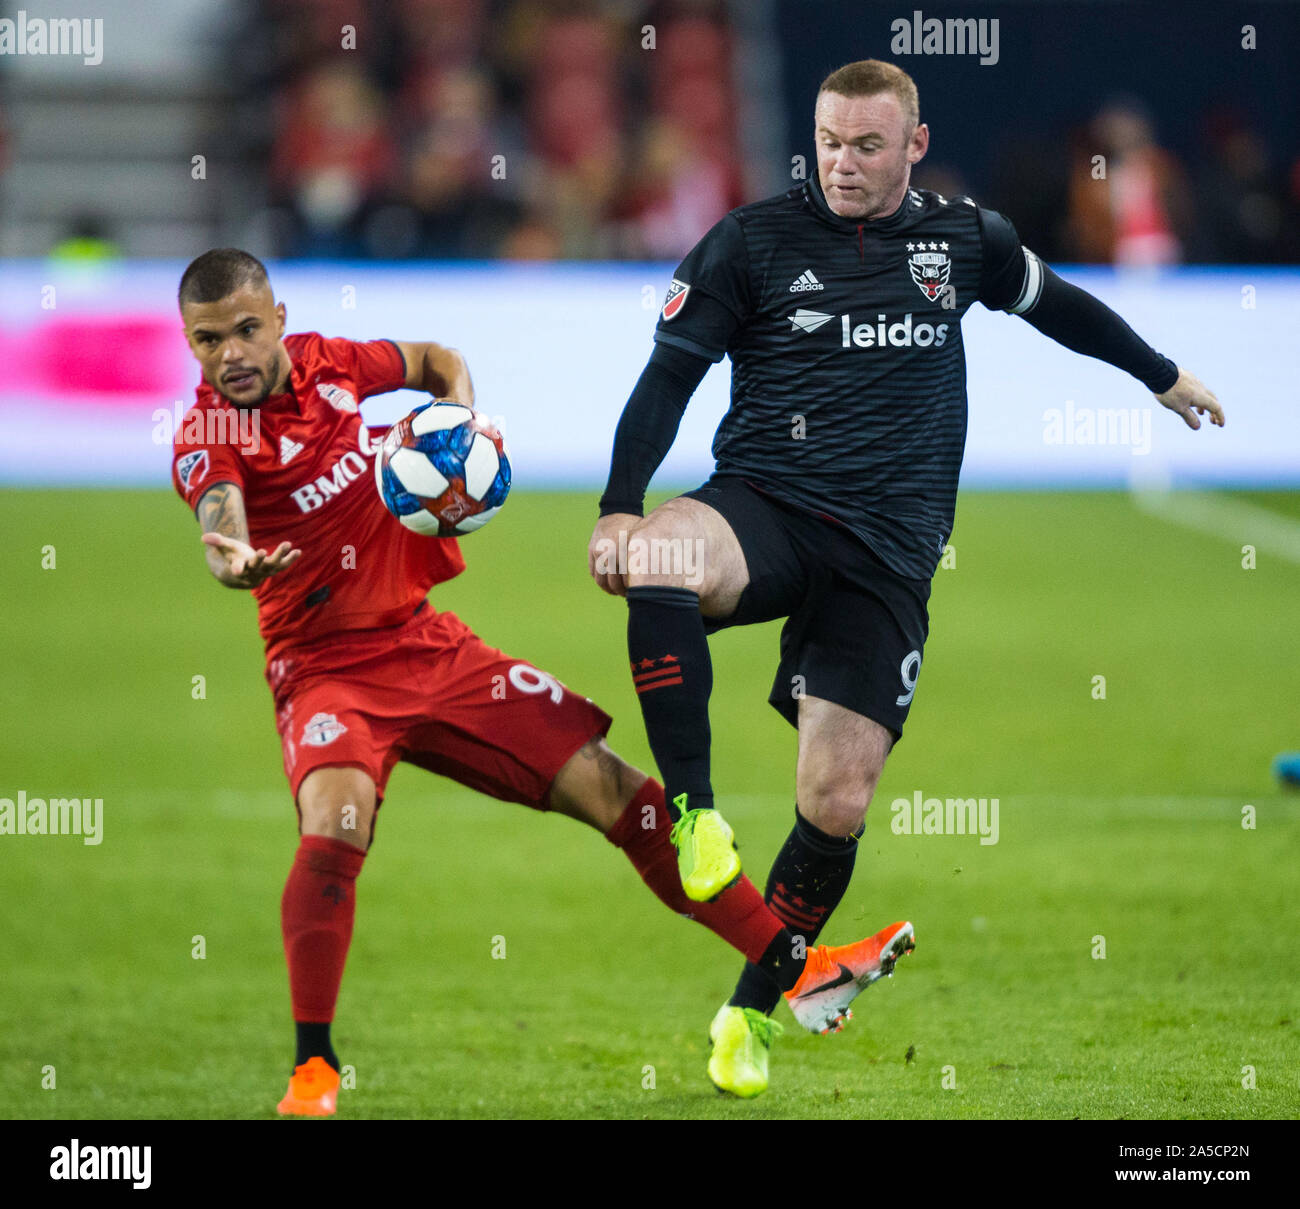 Toronto, Canada. 19th Oct, 2019. Wayne Rooney (R) of D.C. United vies with Auro Jr. of Toronto FC during the first round match of the 2019 Major League Soccer (MLS) Cup Playoffs between D.C. United and Toronto FC at BMO Field in Toronto, Canada, Oct. 19, 2019. Credit: Zou Zheng/Xinhua/Alamy Live News Stock Photo